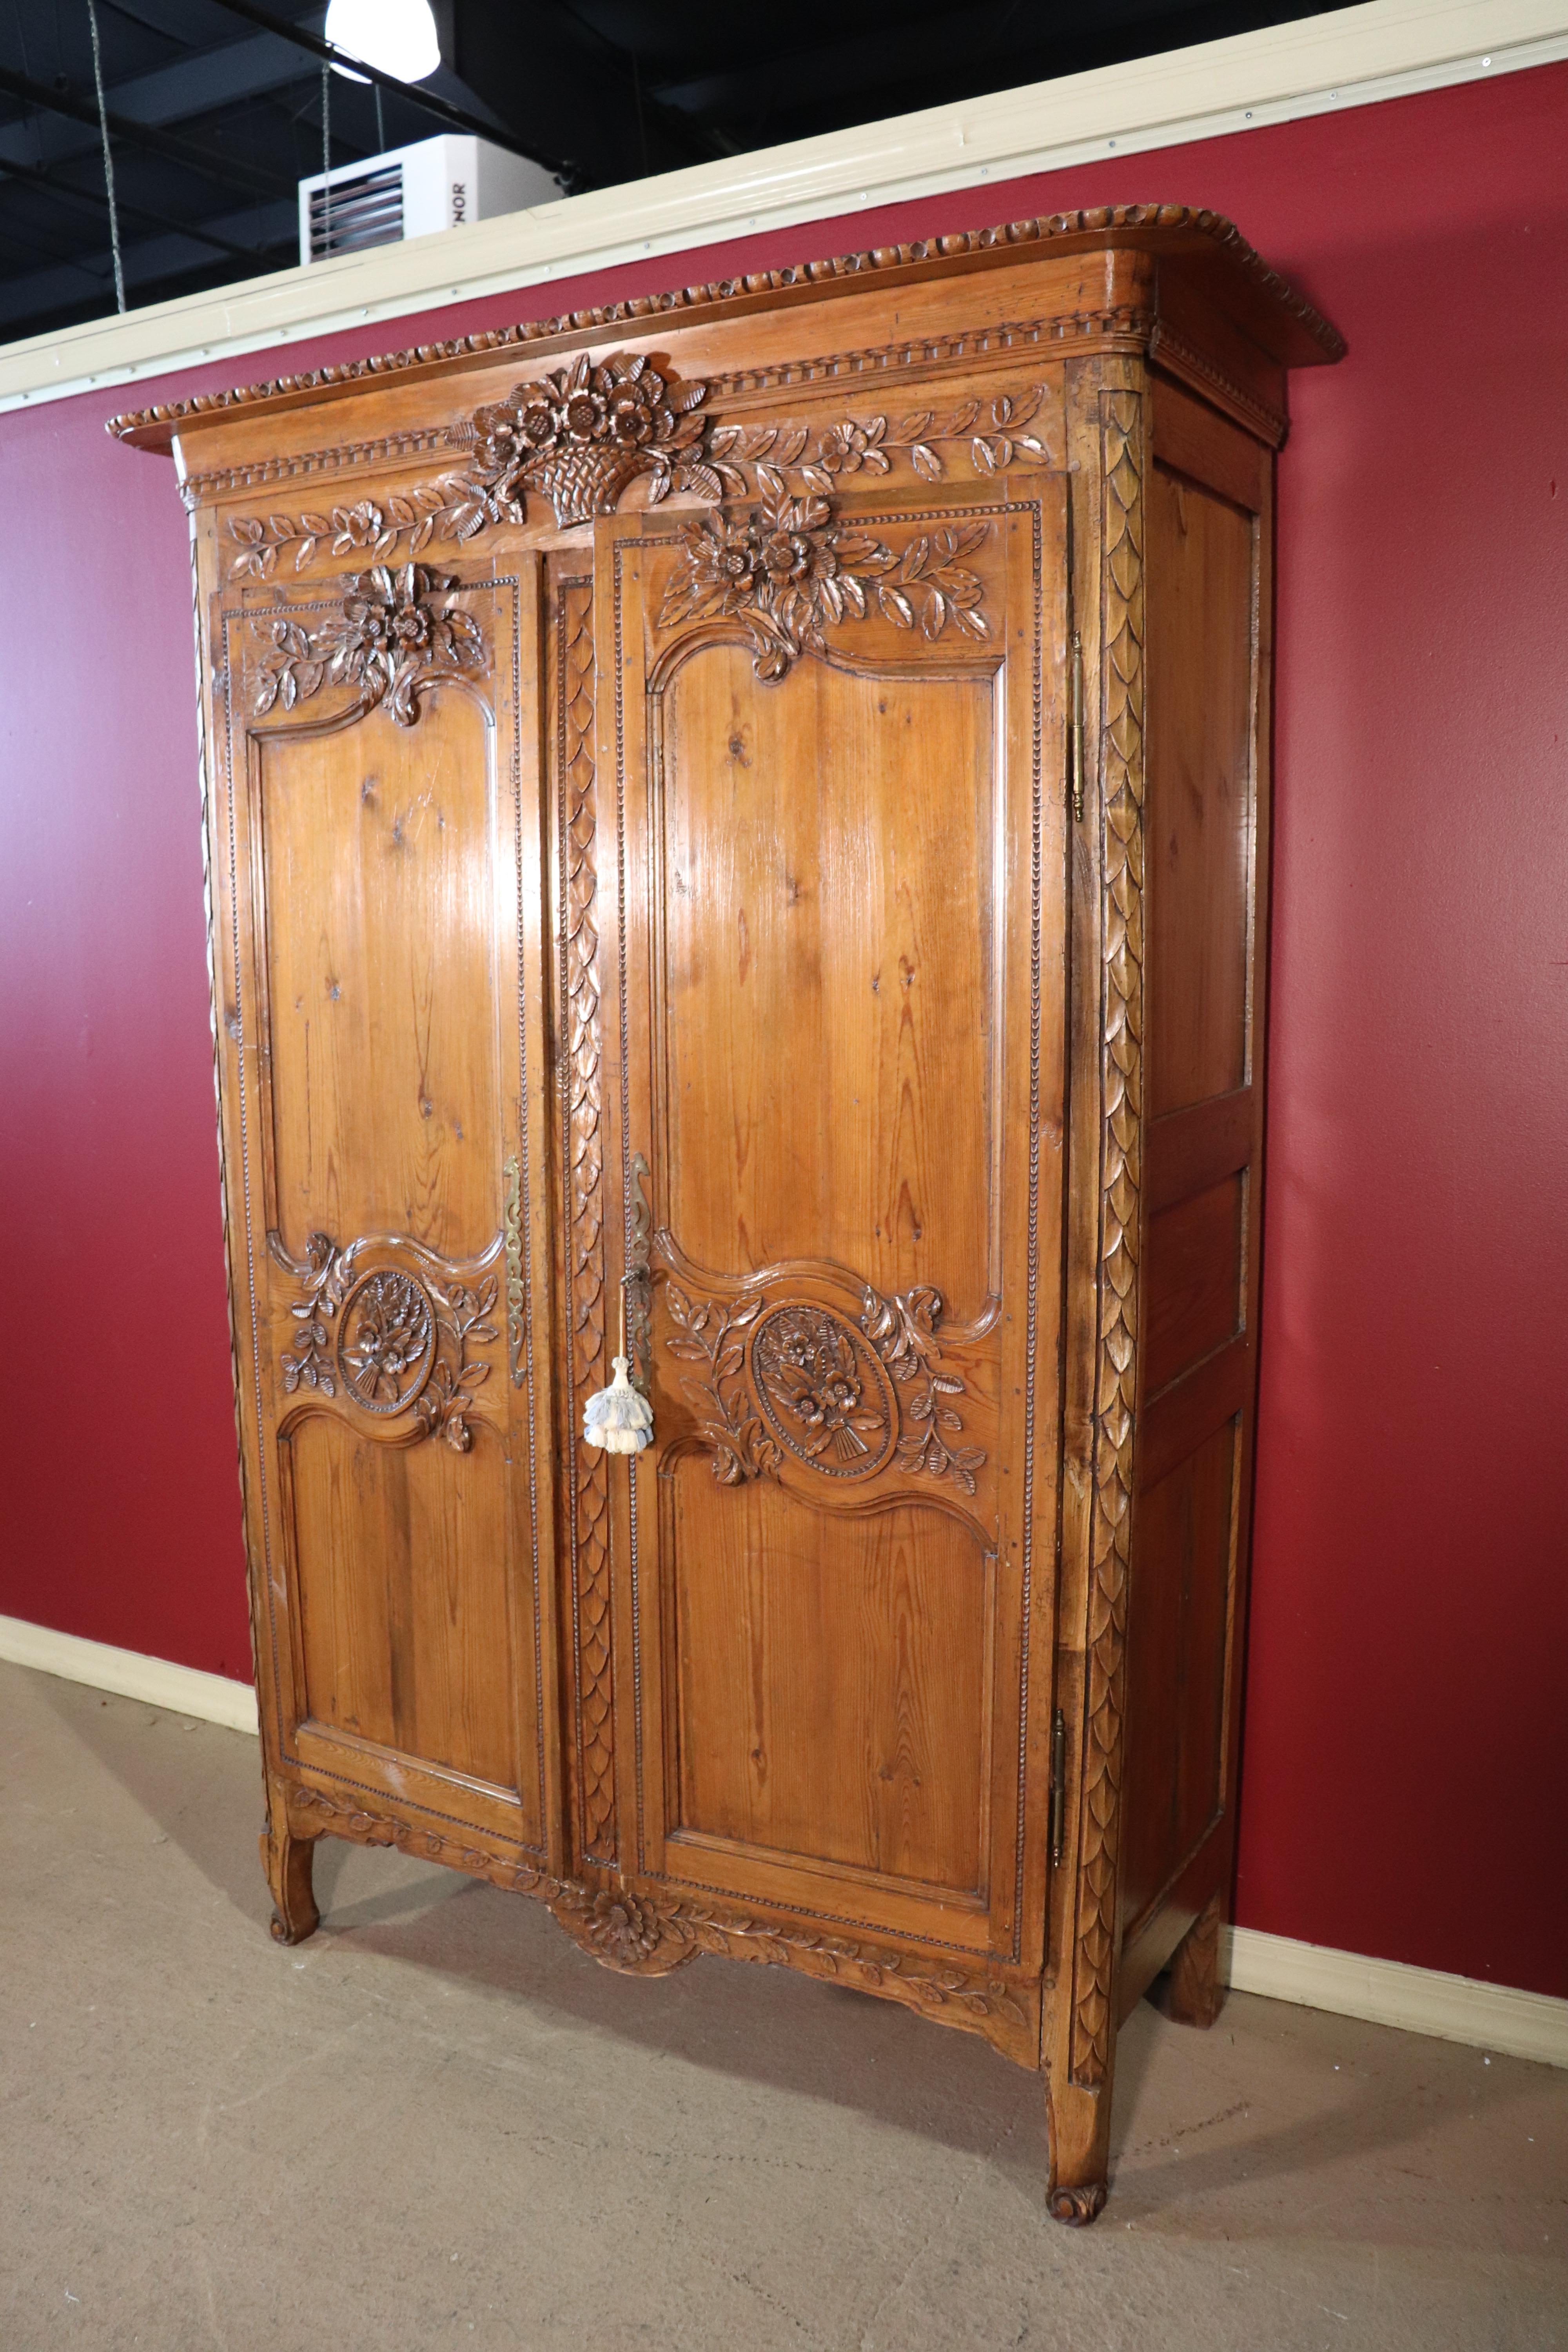 This is a beautifully carved pine French country armoire, circa 1840. The armoire has been converted to use for a television but that was commonly done in the early 2000s as many already know. The armoire features fine carving and great antique